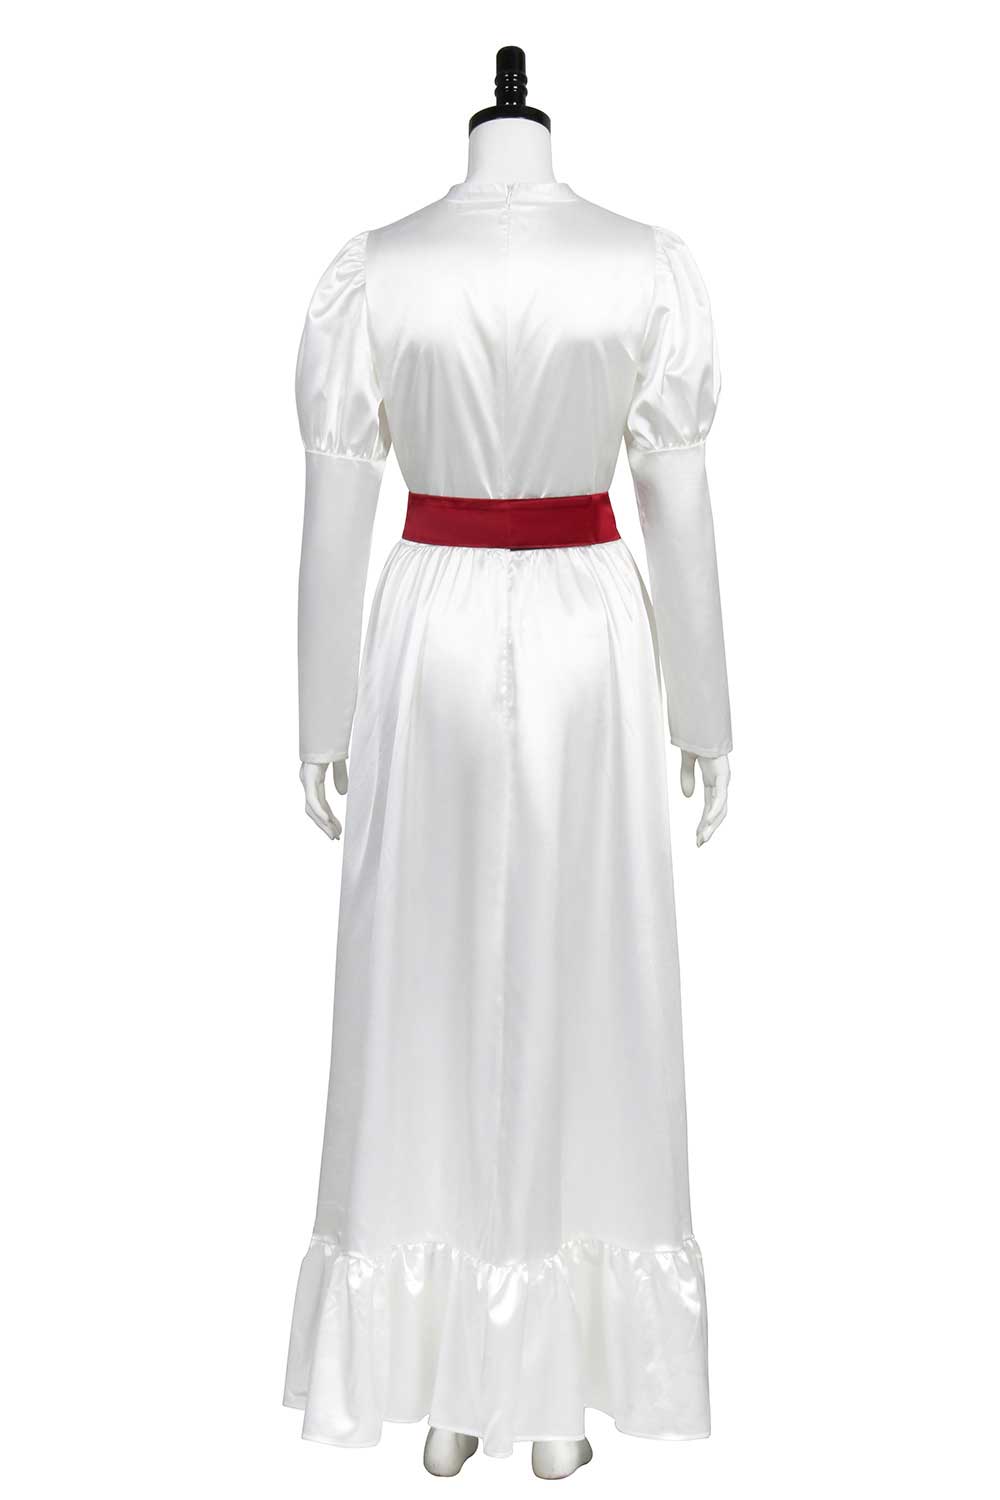 Annabelle Comes Home Role Play Dress Halloween Cosplay Costume